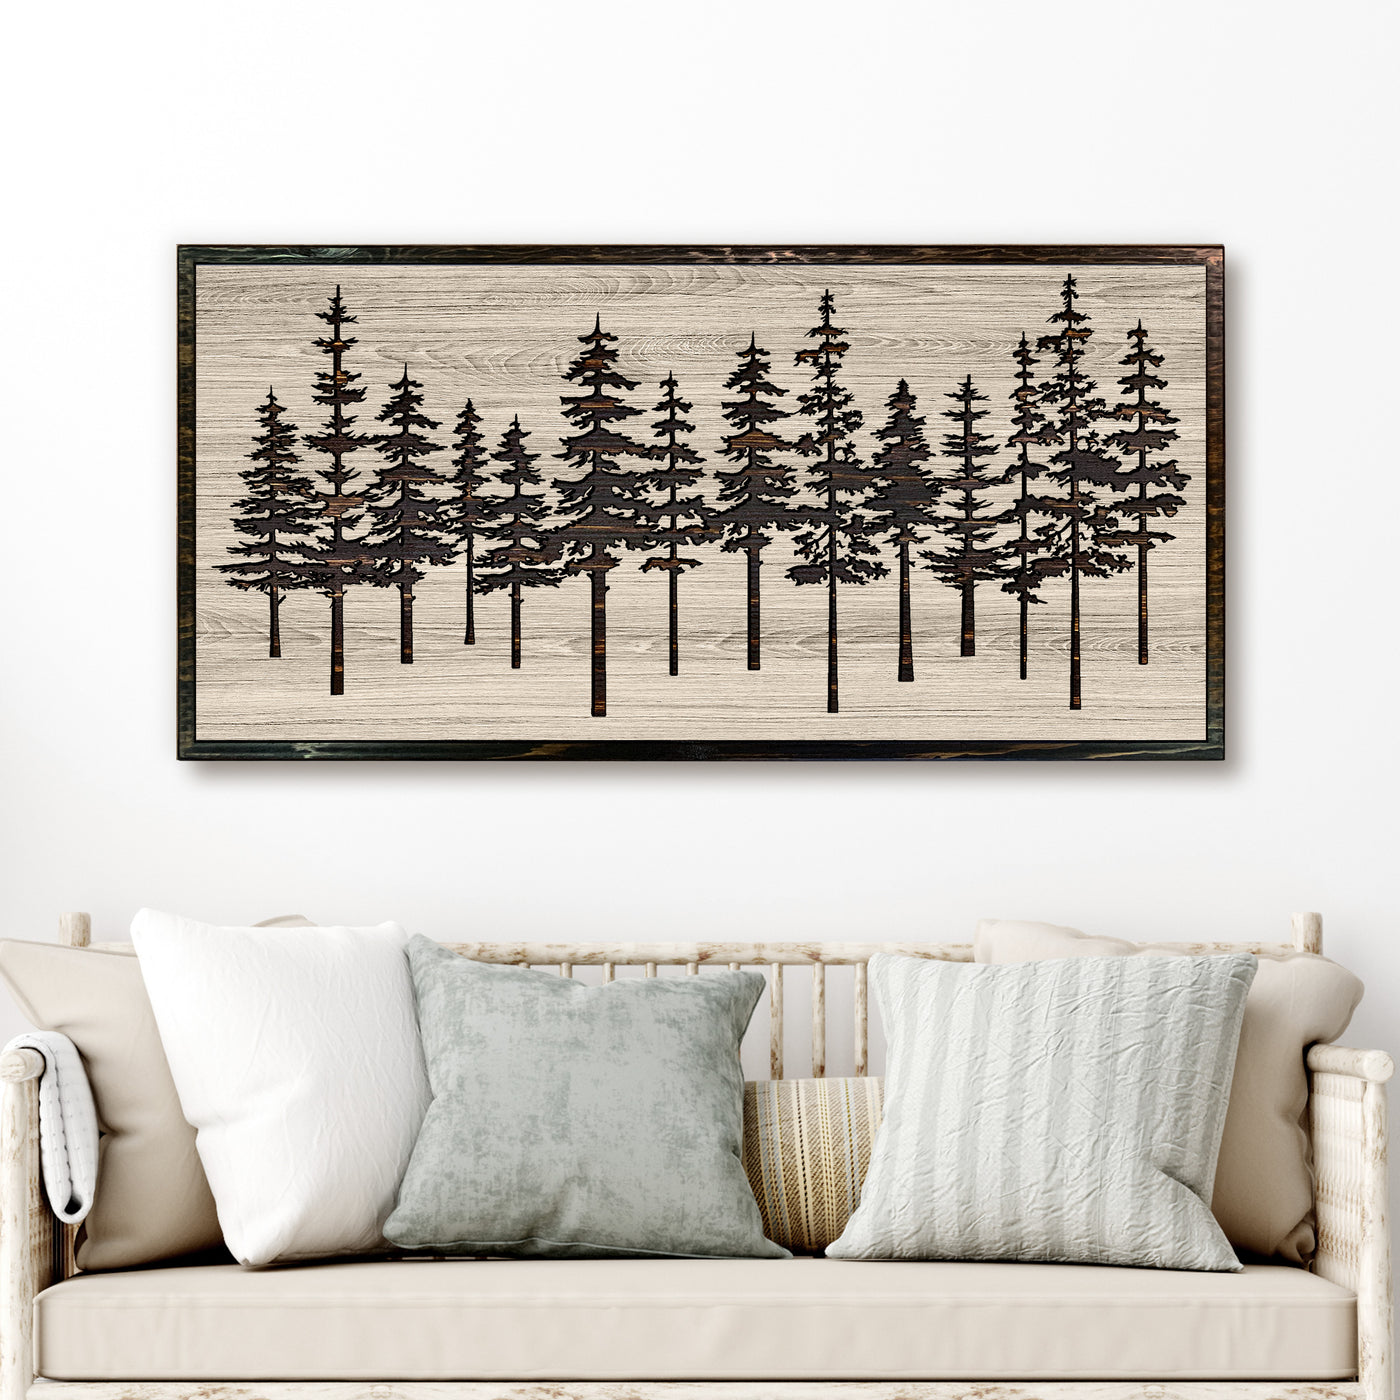 Pine tree forest custom carved nature wood wall art